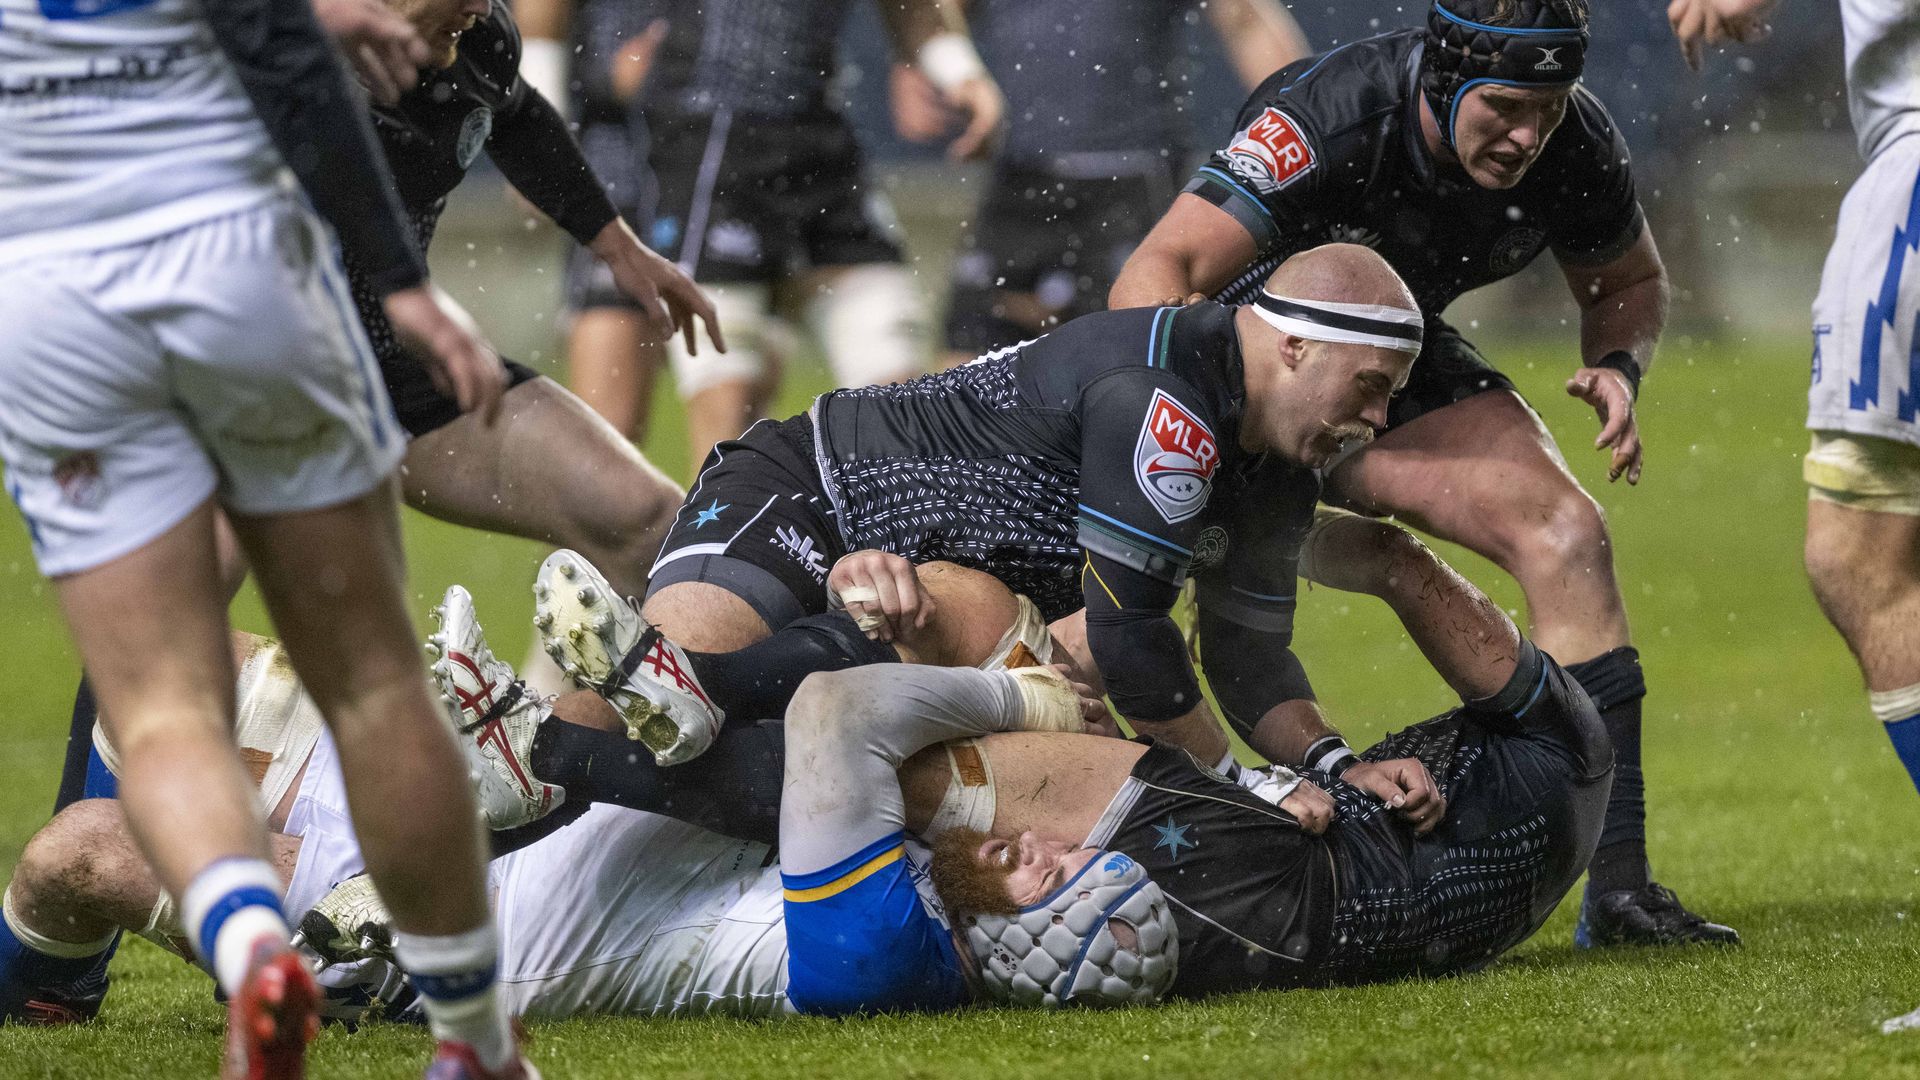 Photo of rugby players during a match 